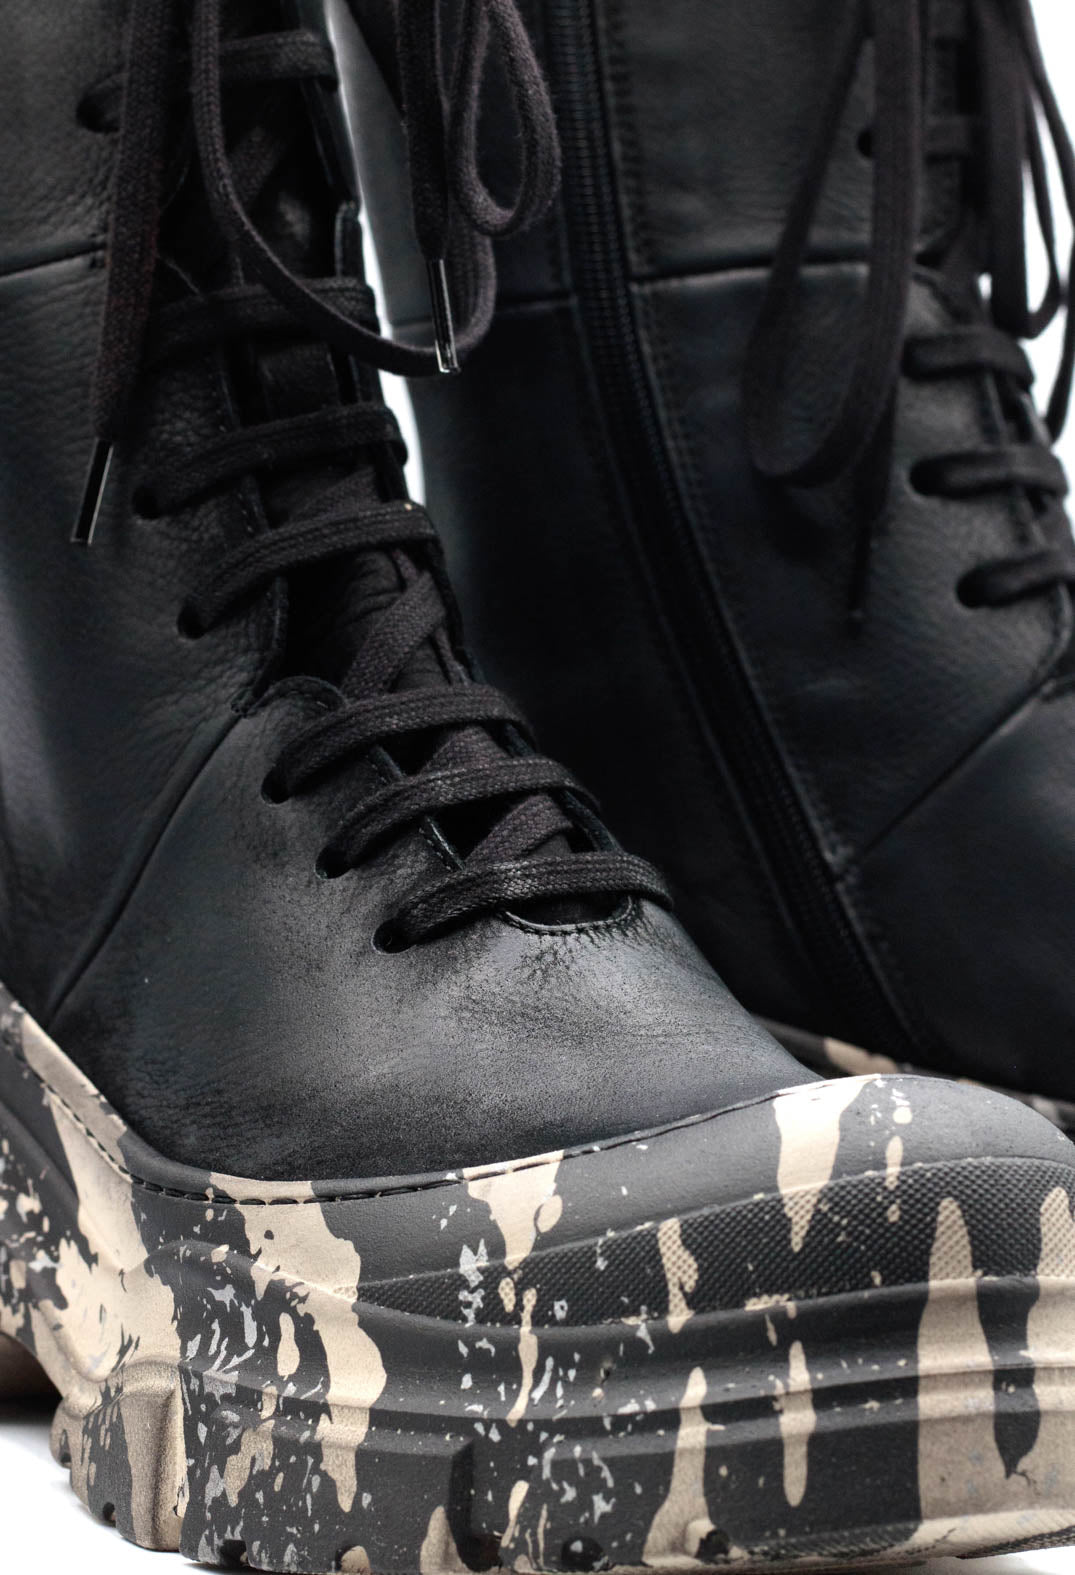 Lace Up Boots With Chunky Sole in Gasoline Nero